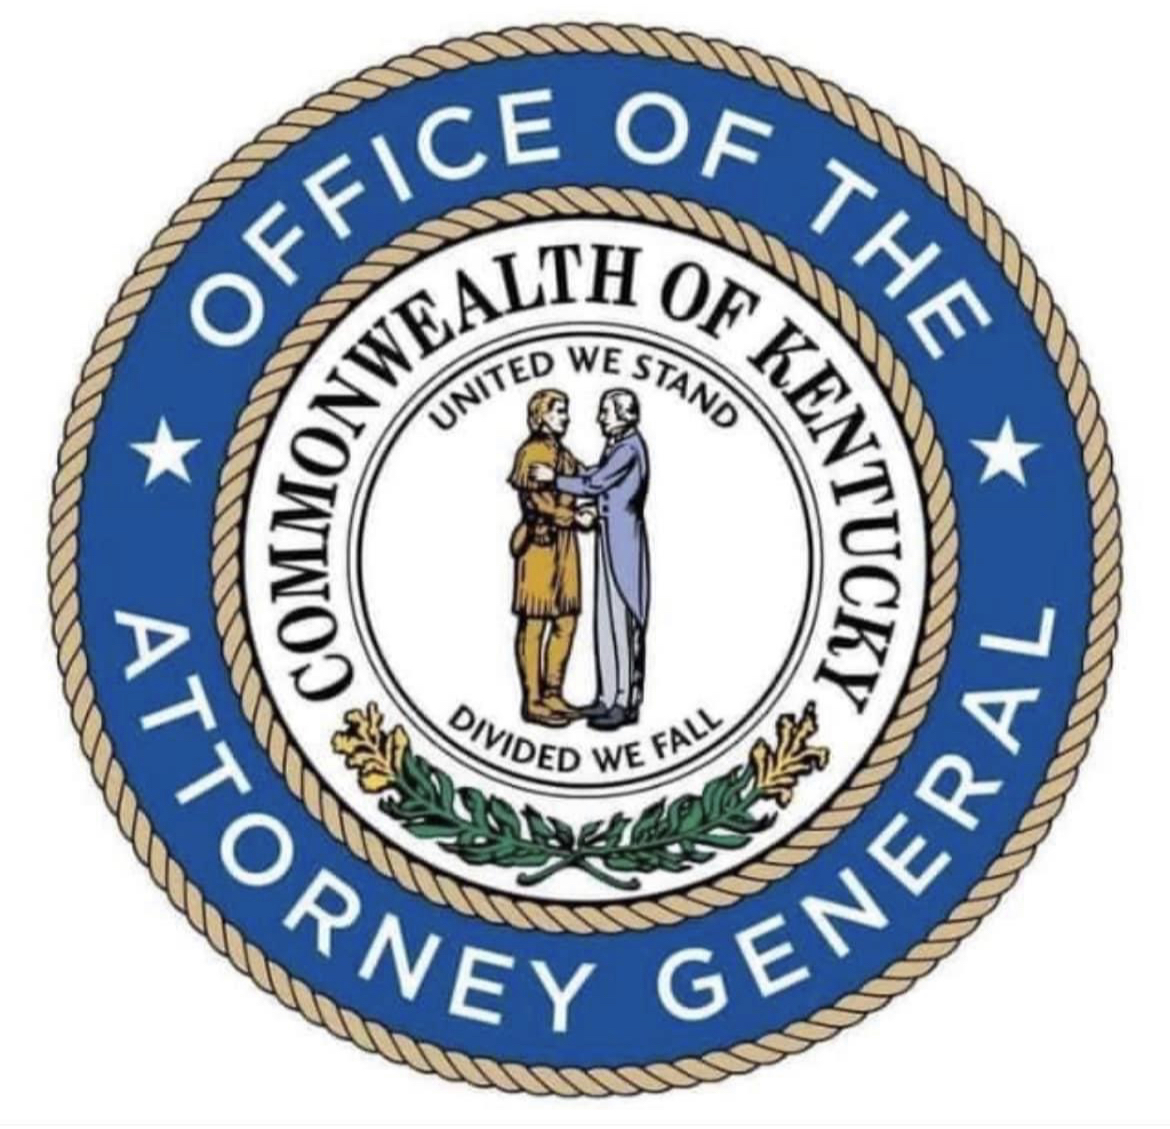 Kentucky Attorney General open records and open meetings decisions issued  last week